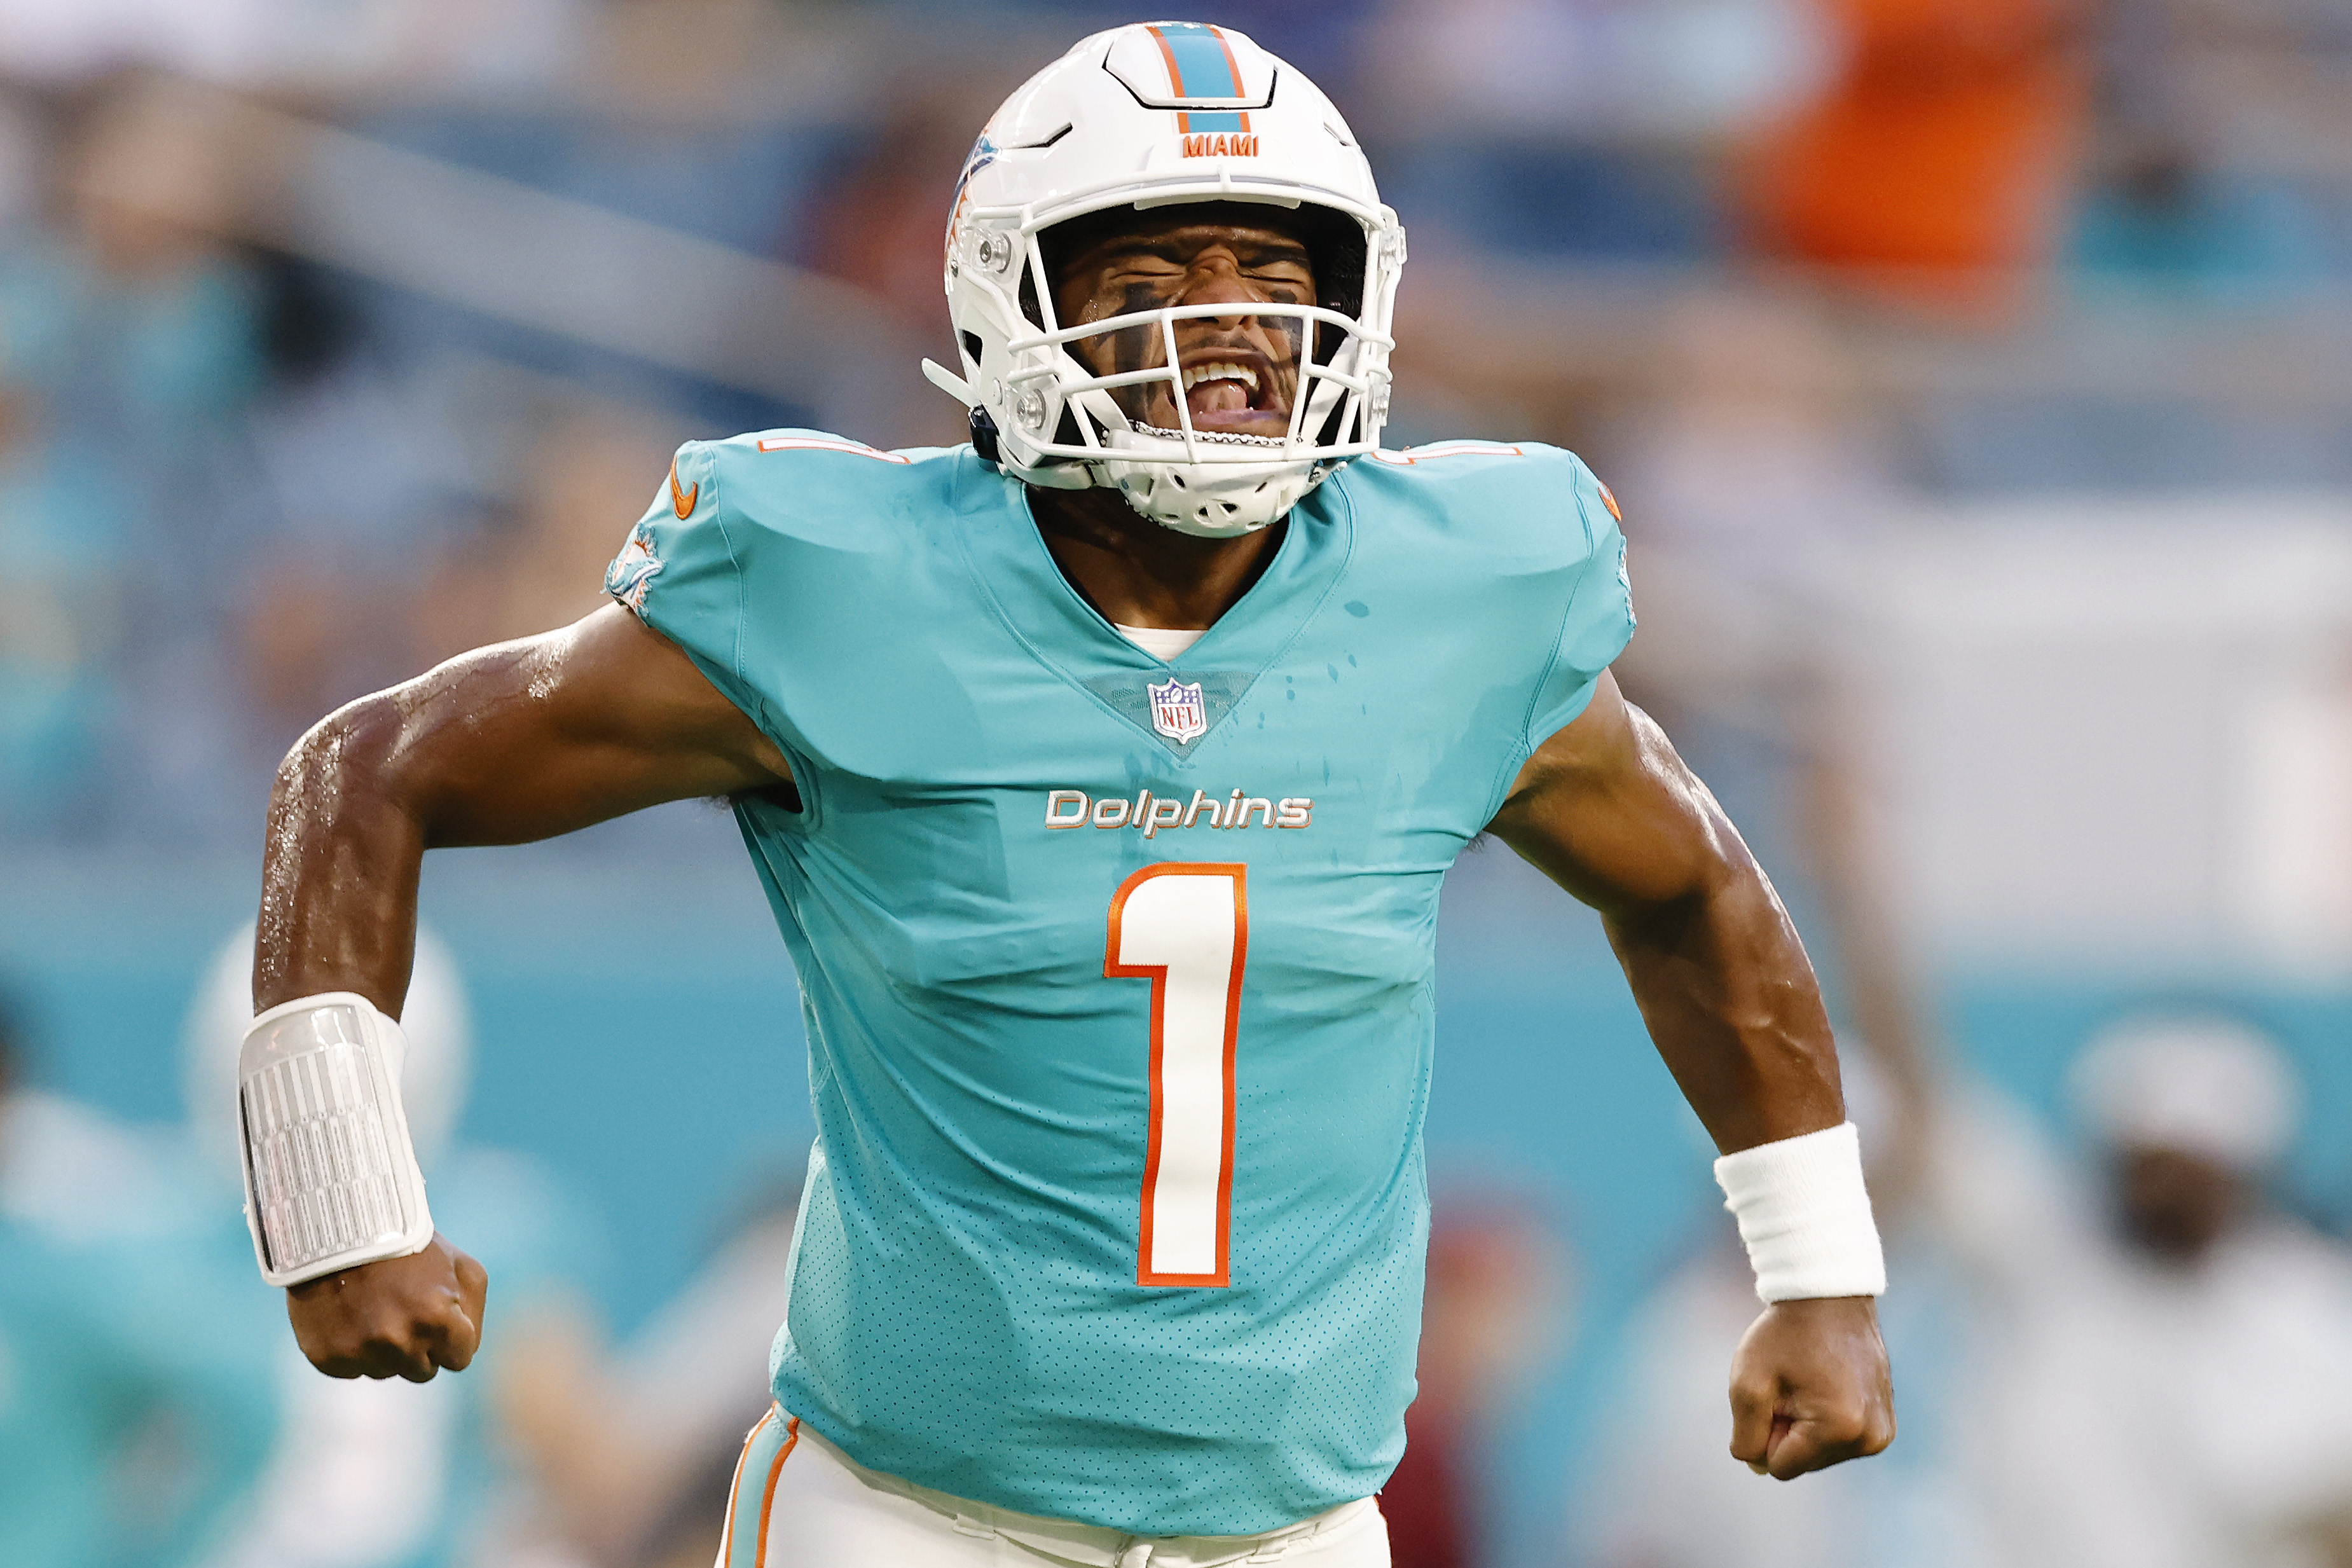 The Dolphins are famished for a franchise quarterback. In his second